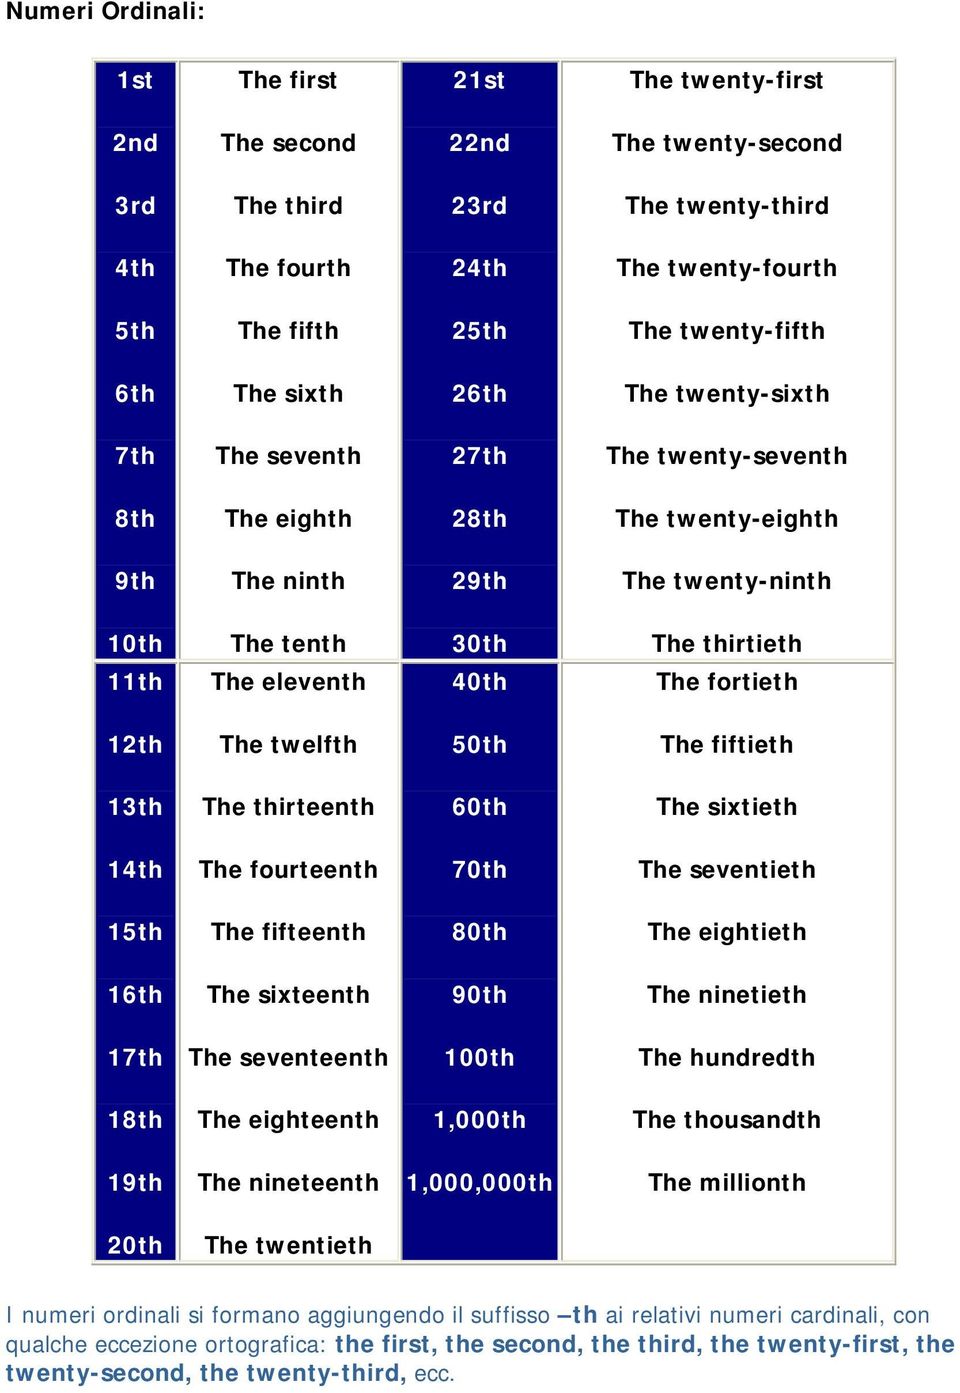 30th 40th The thirtieth The fortieth 12th The twelfth 50th The fiftieth 13th The thirteenth 60th The sixtieth 14th The fourteenth 70th The seventieth 15th The fifteenth 80th The eightieth 16th The